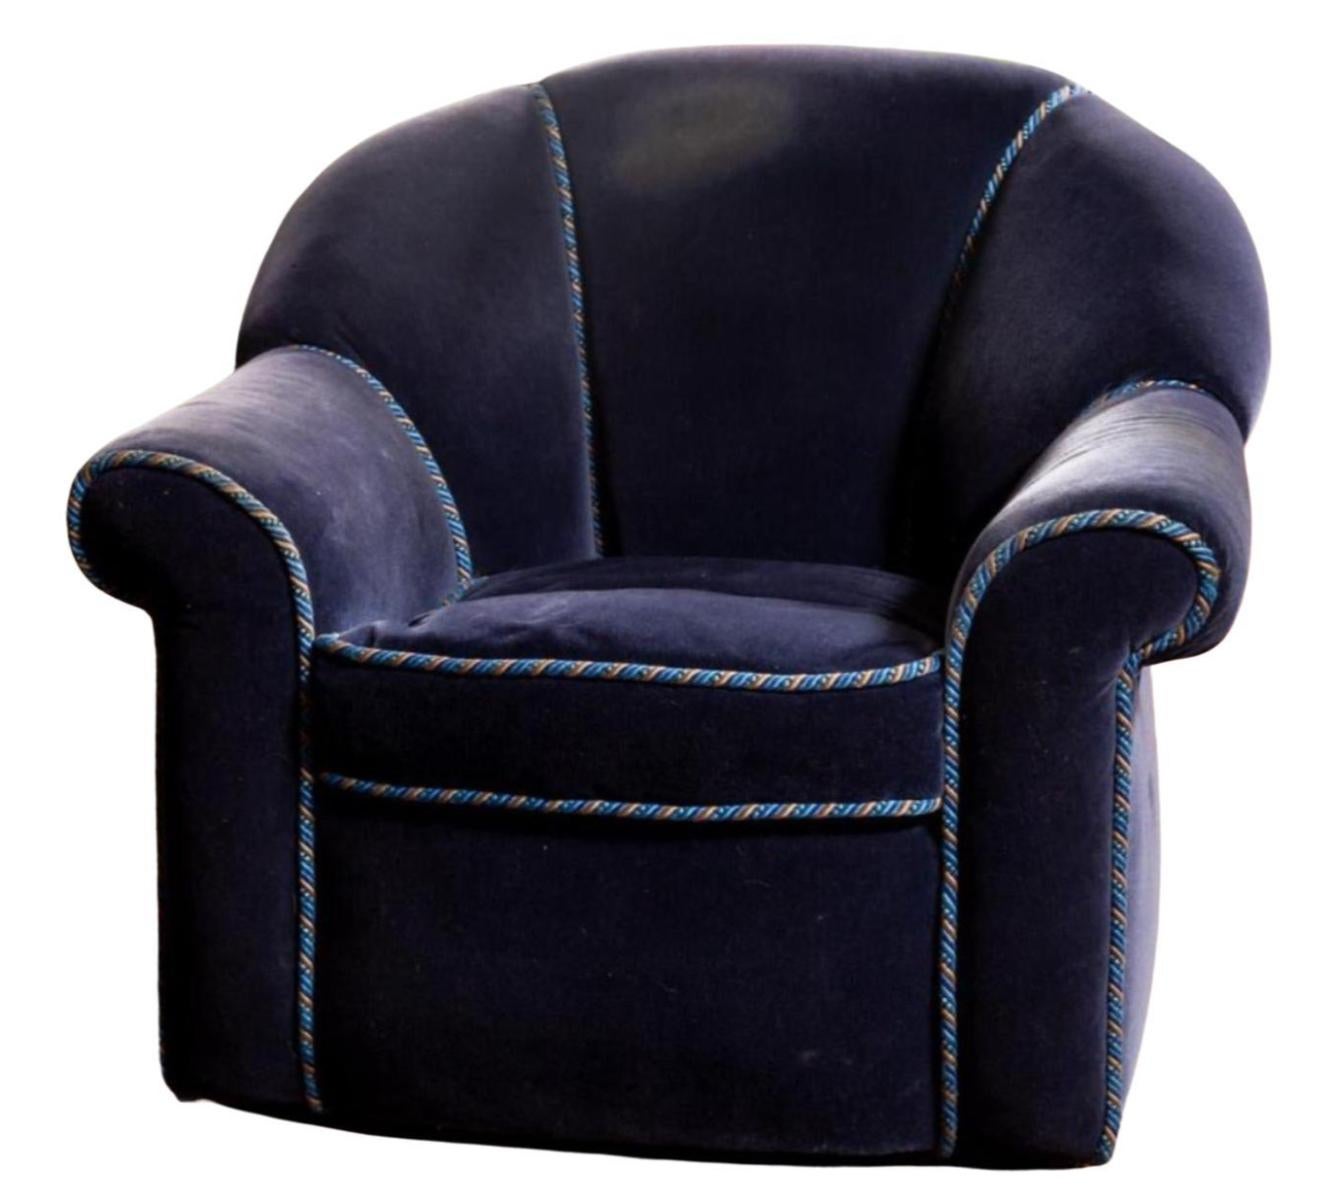 Art Deco Style Upholstering Sapphire Blue Mohair Club Chair im Zustand „Gut“ in LOS ANGELES, CA